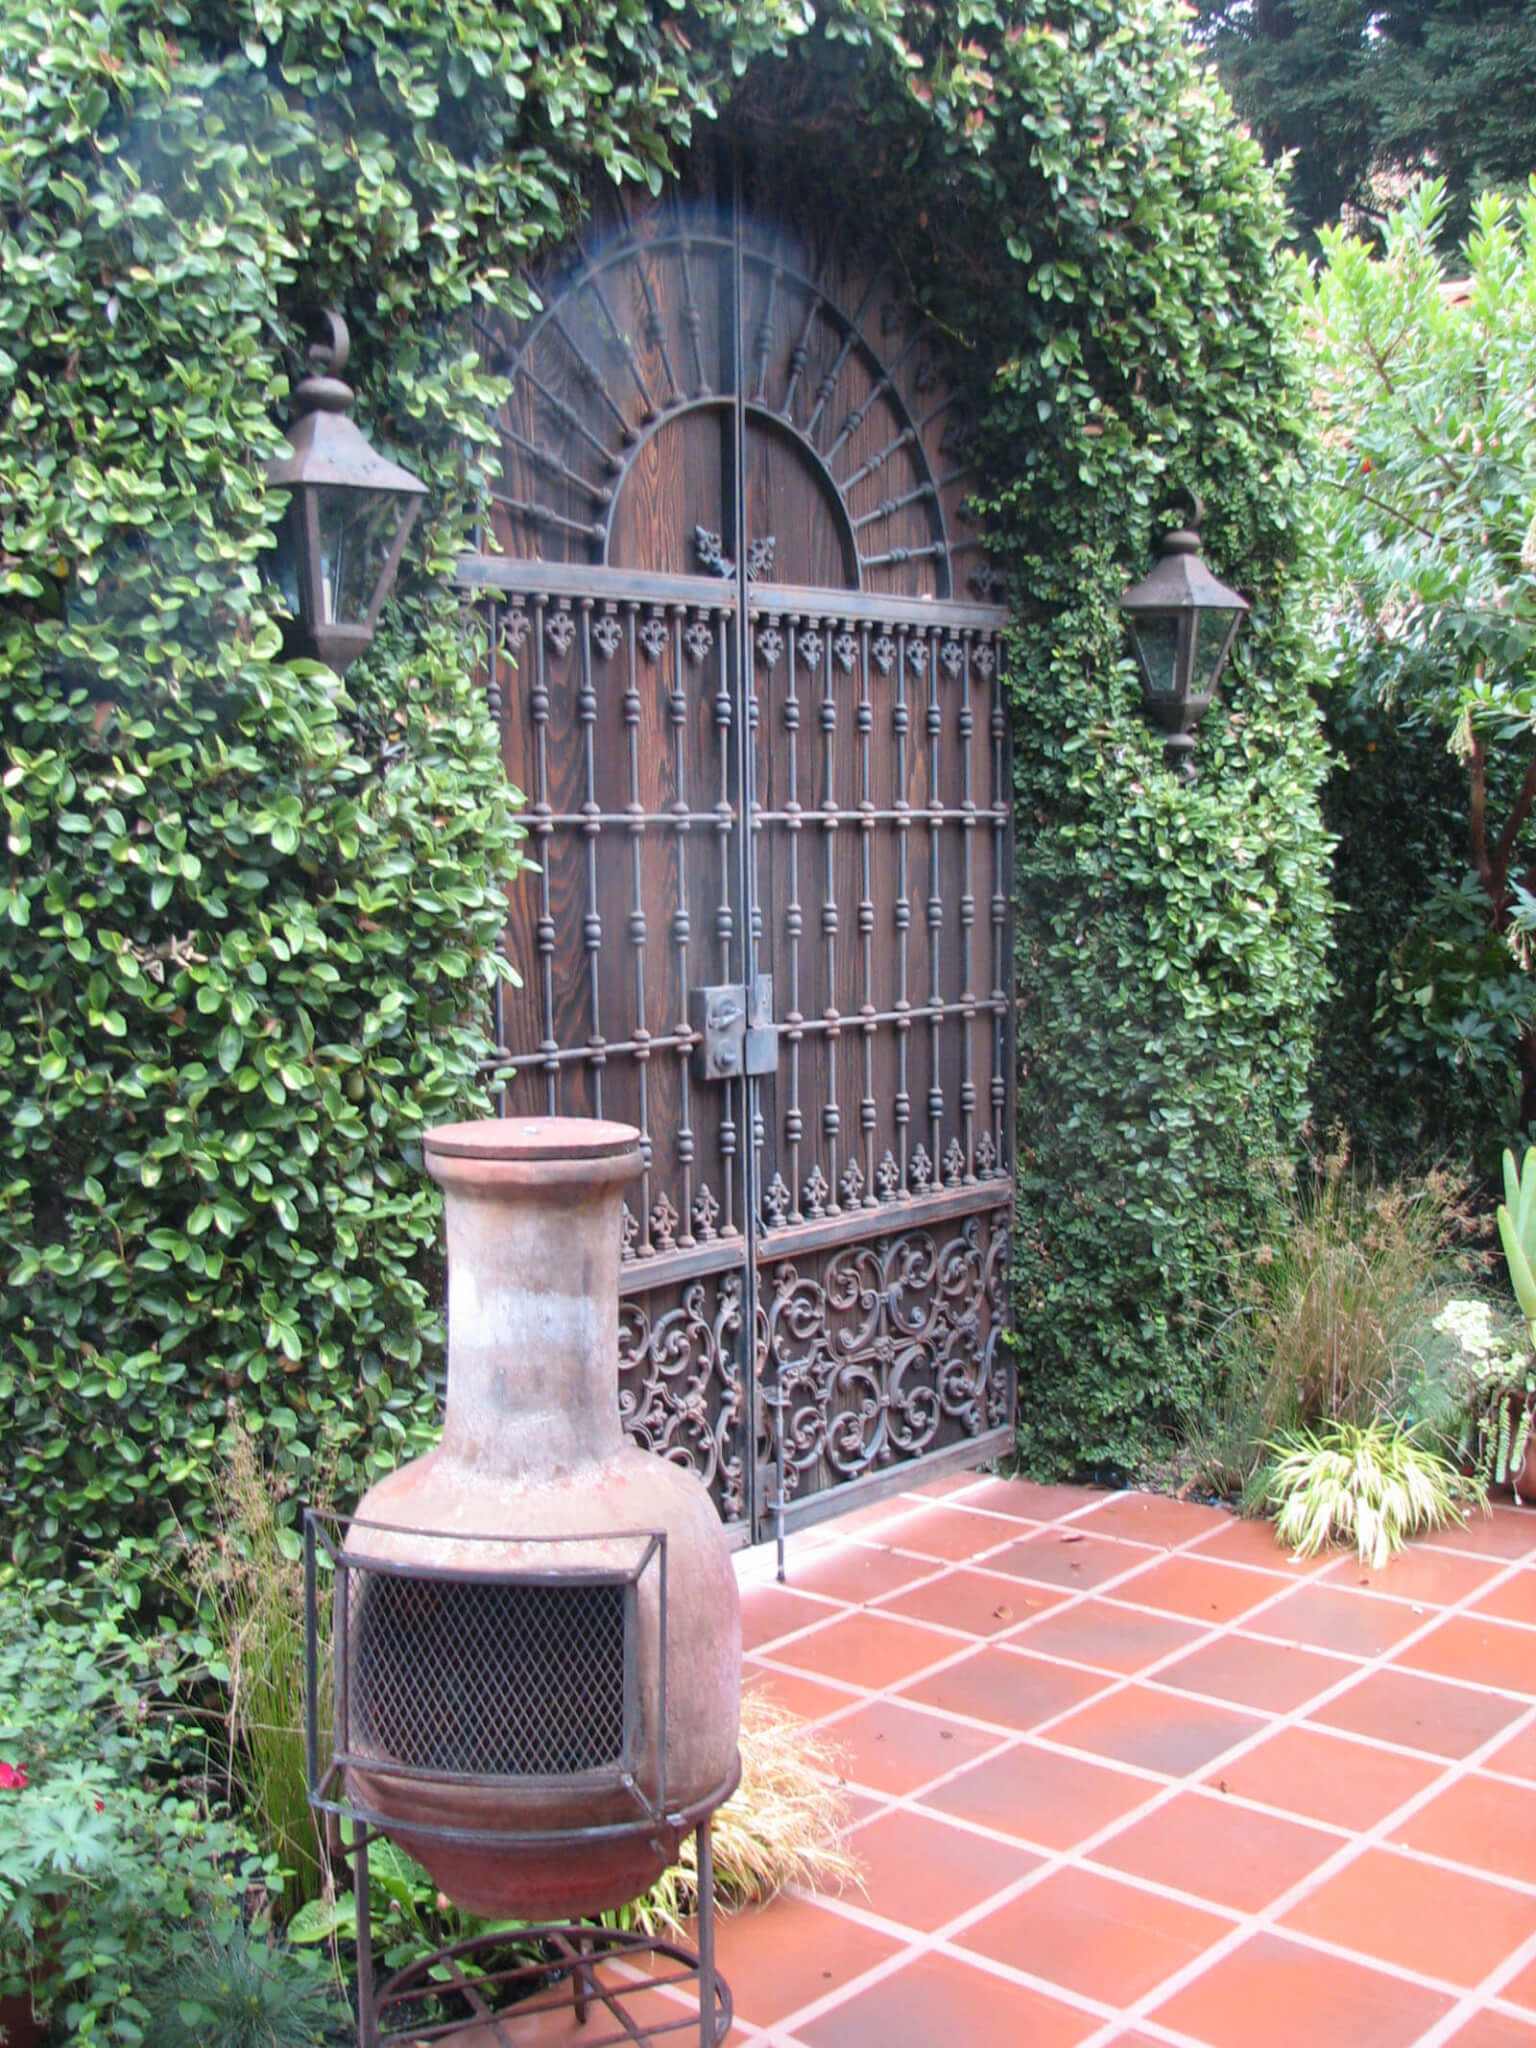 Rustic iron and wood doors set in vine-covered wall opens into a Spanish style courtyard